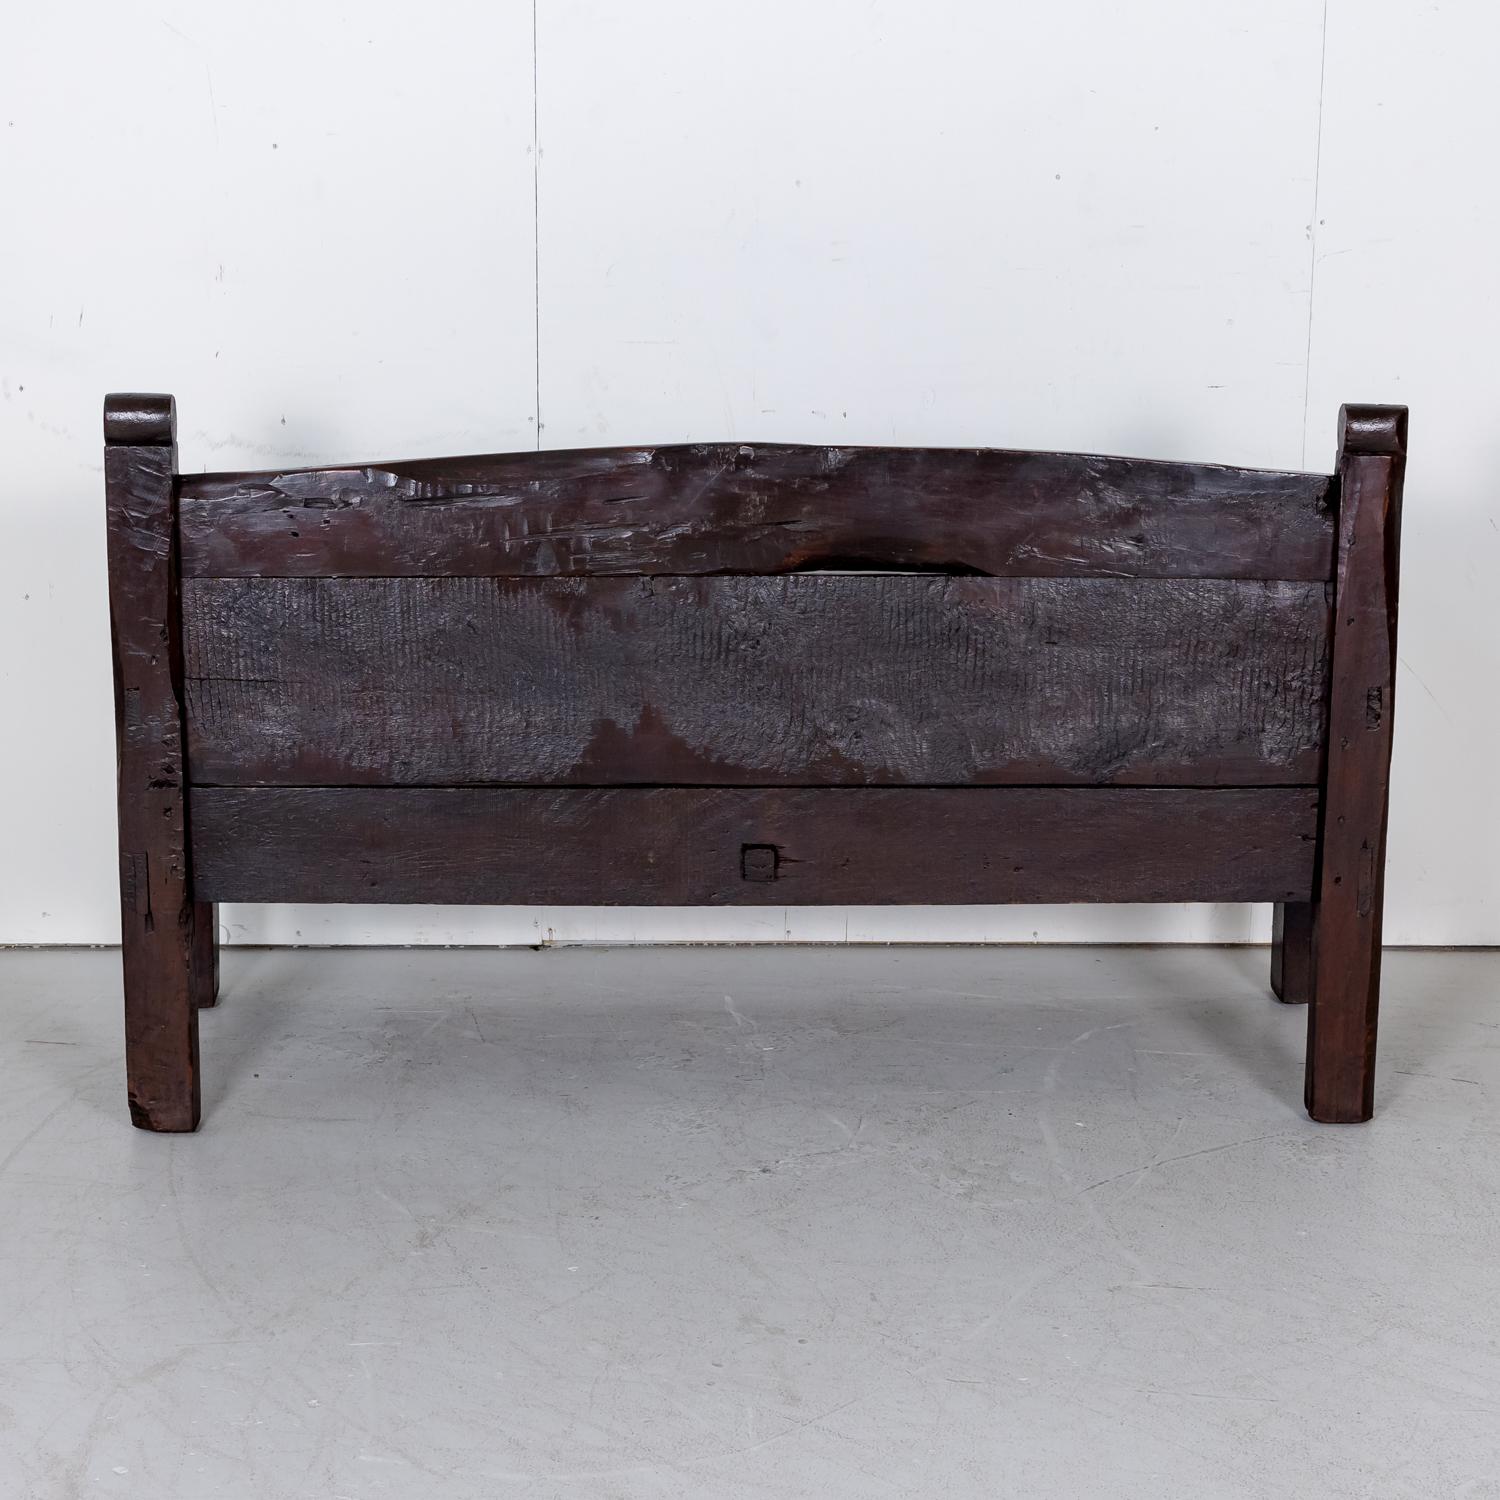 Rustic Mid-18th Century Spanish Walnut Bench with Arms 14